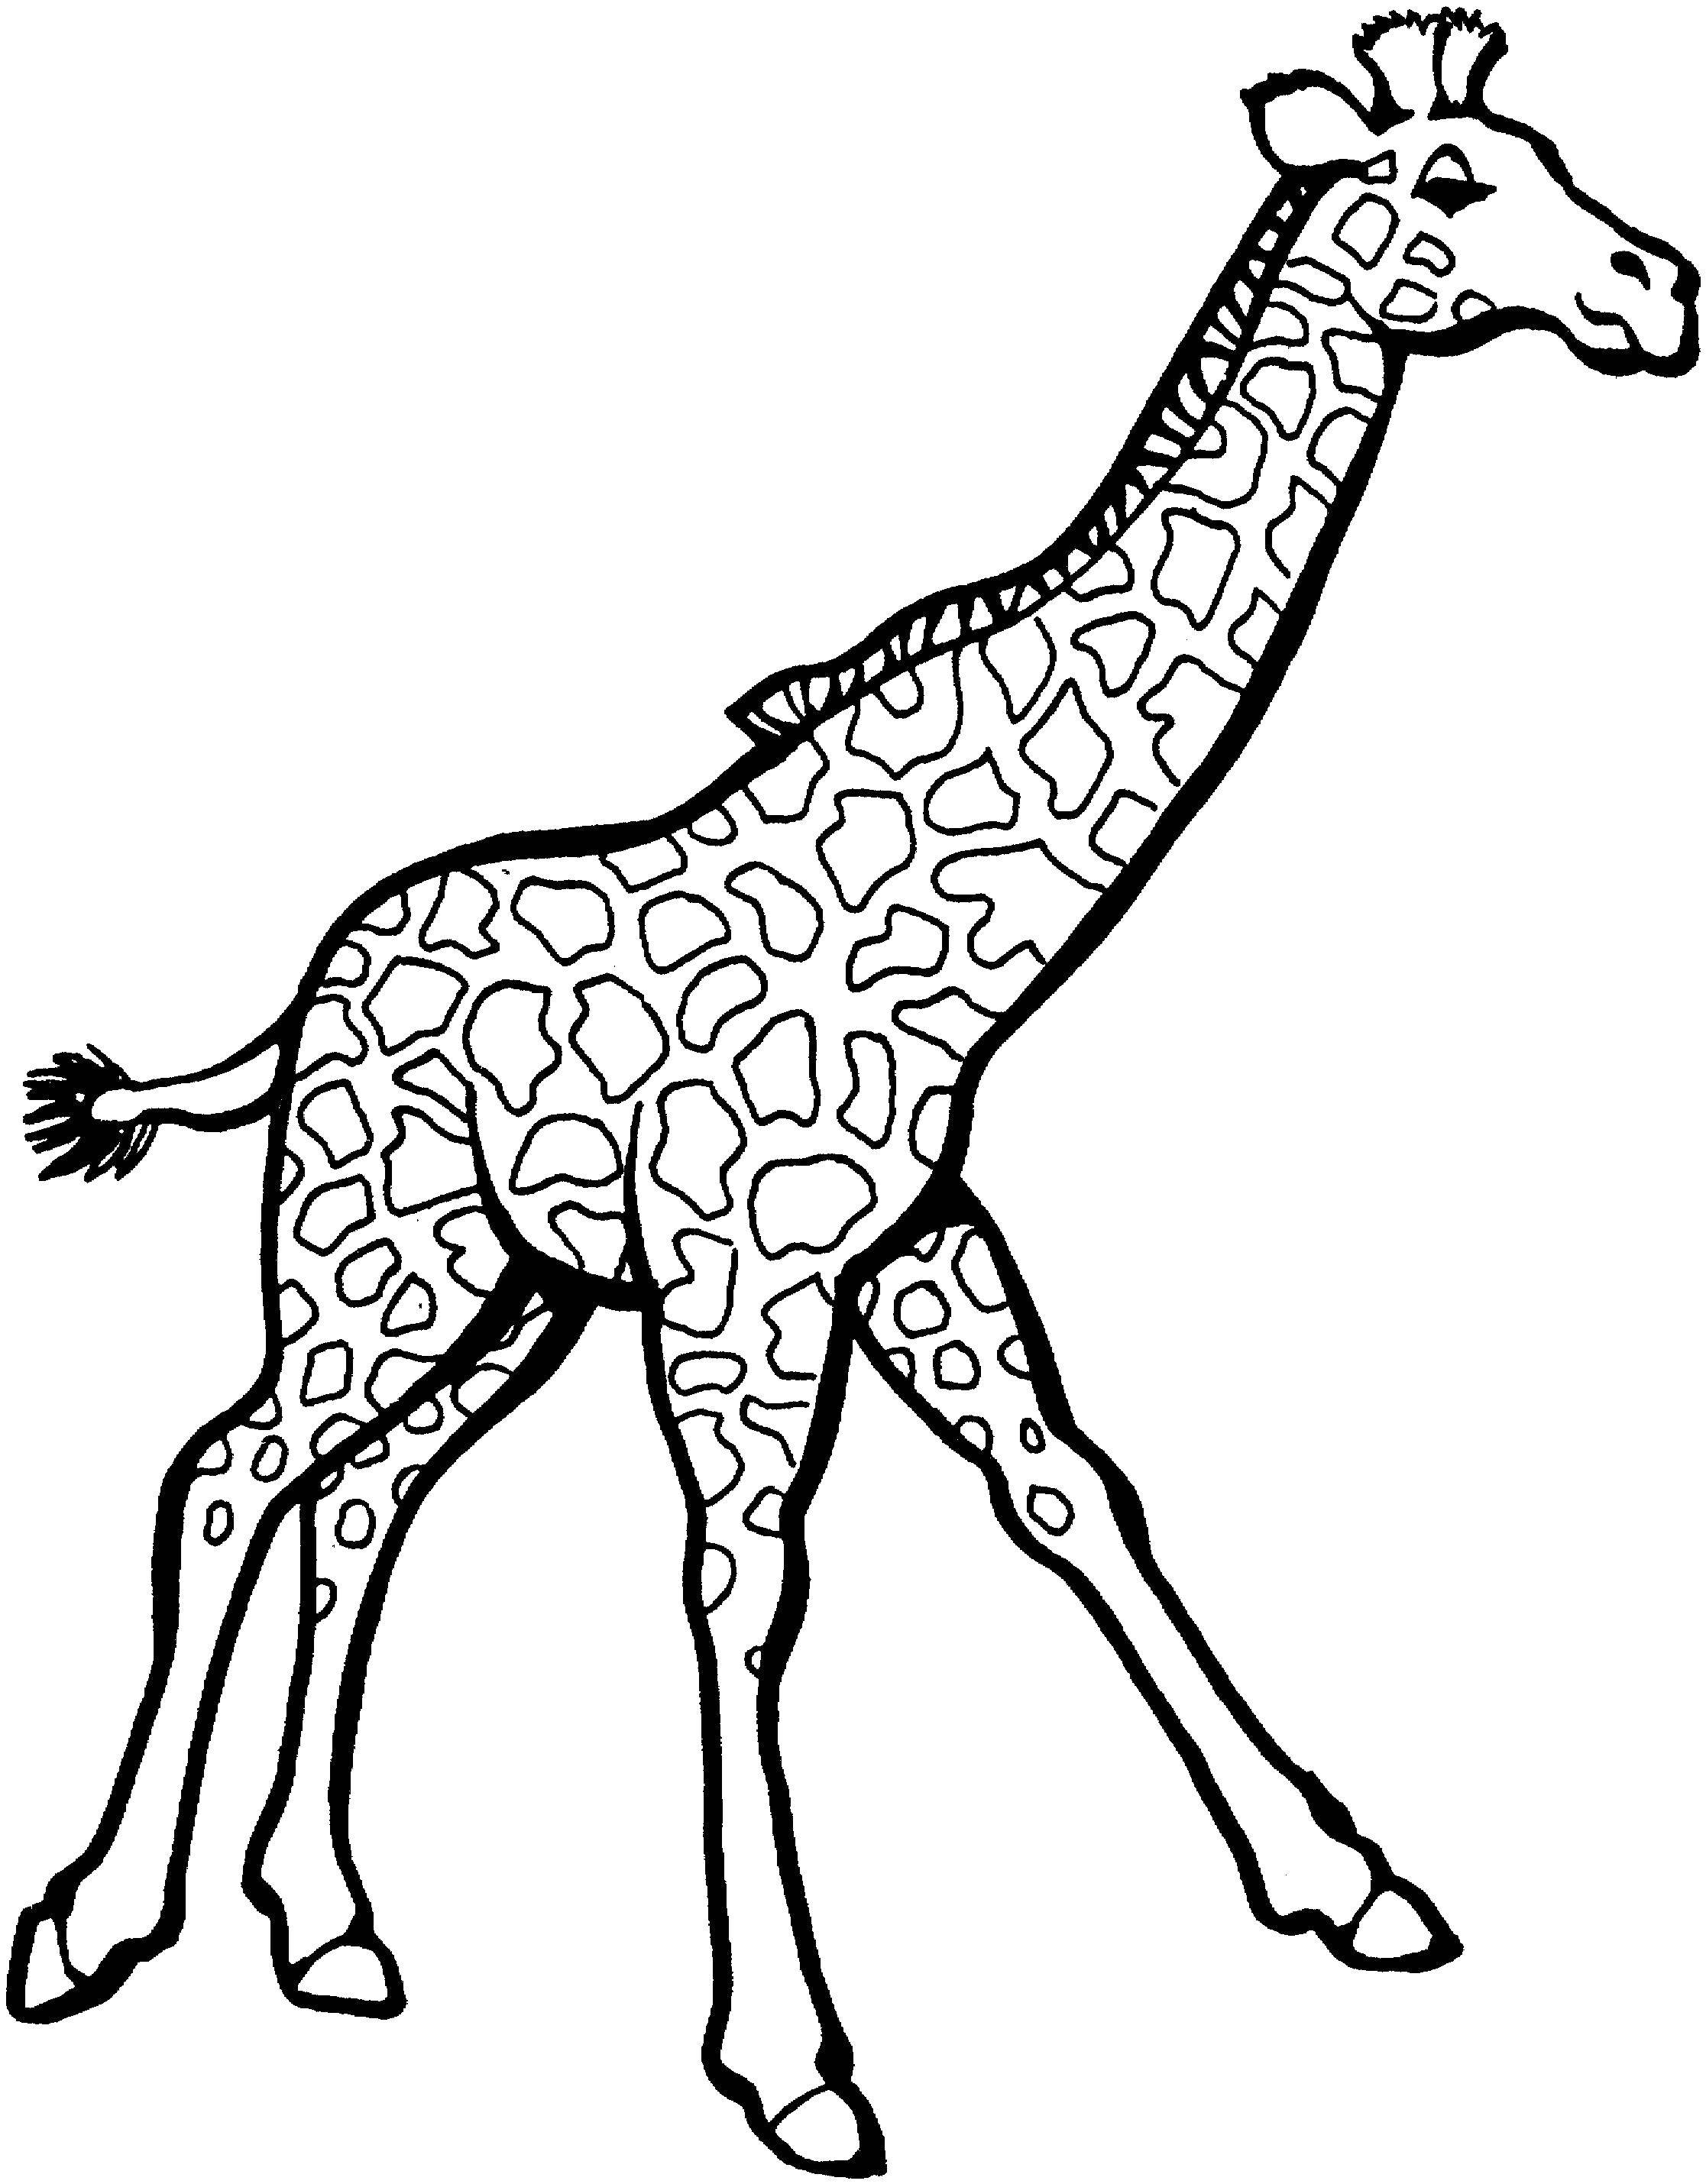 Coloring Giraffe with a long neck. Category Zoo. Tags:  giraffe, neck, legs.